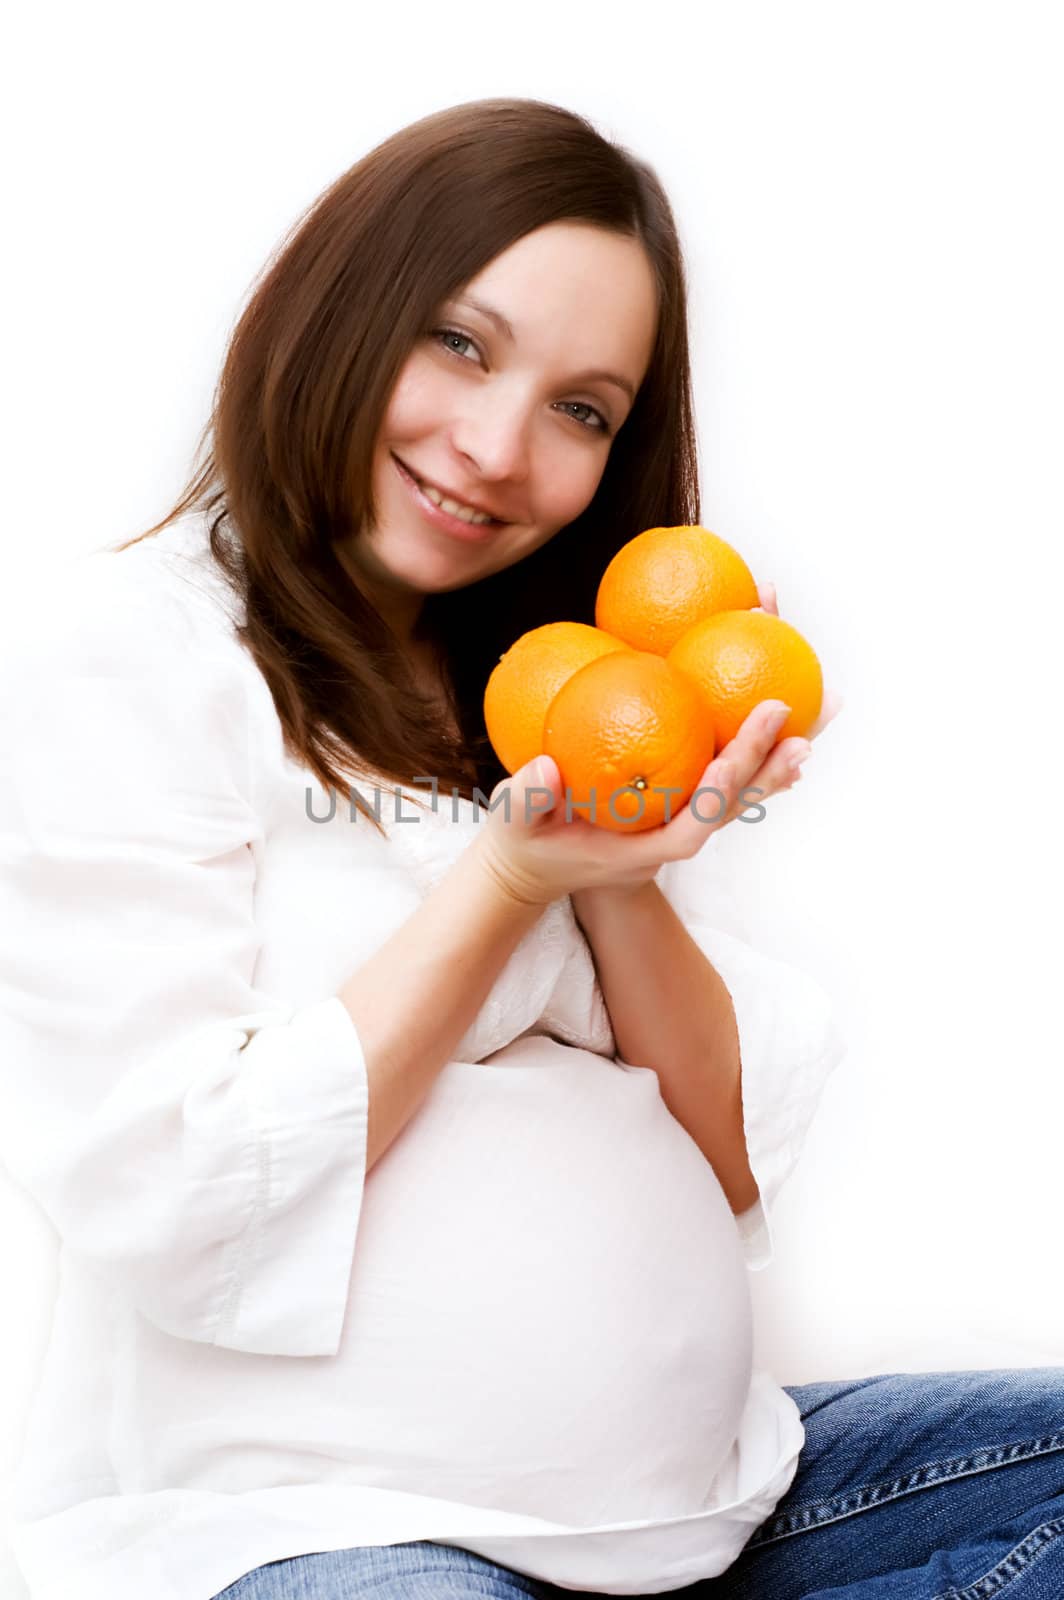 Healthy food in pregnancy by Angel_a